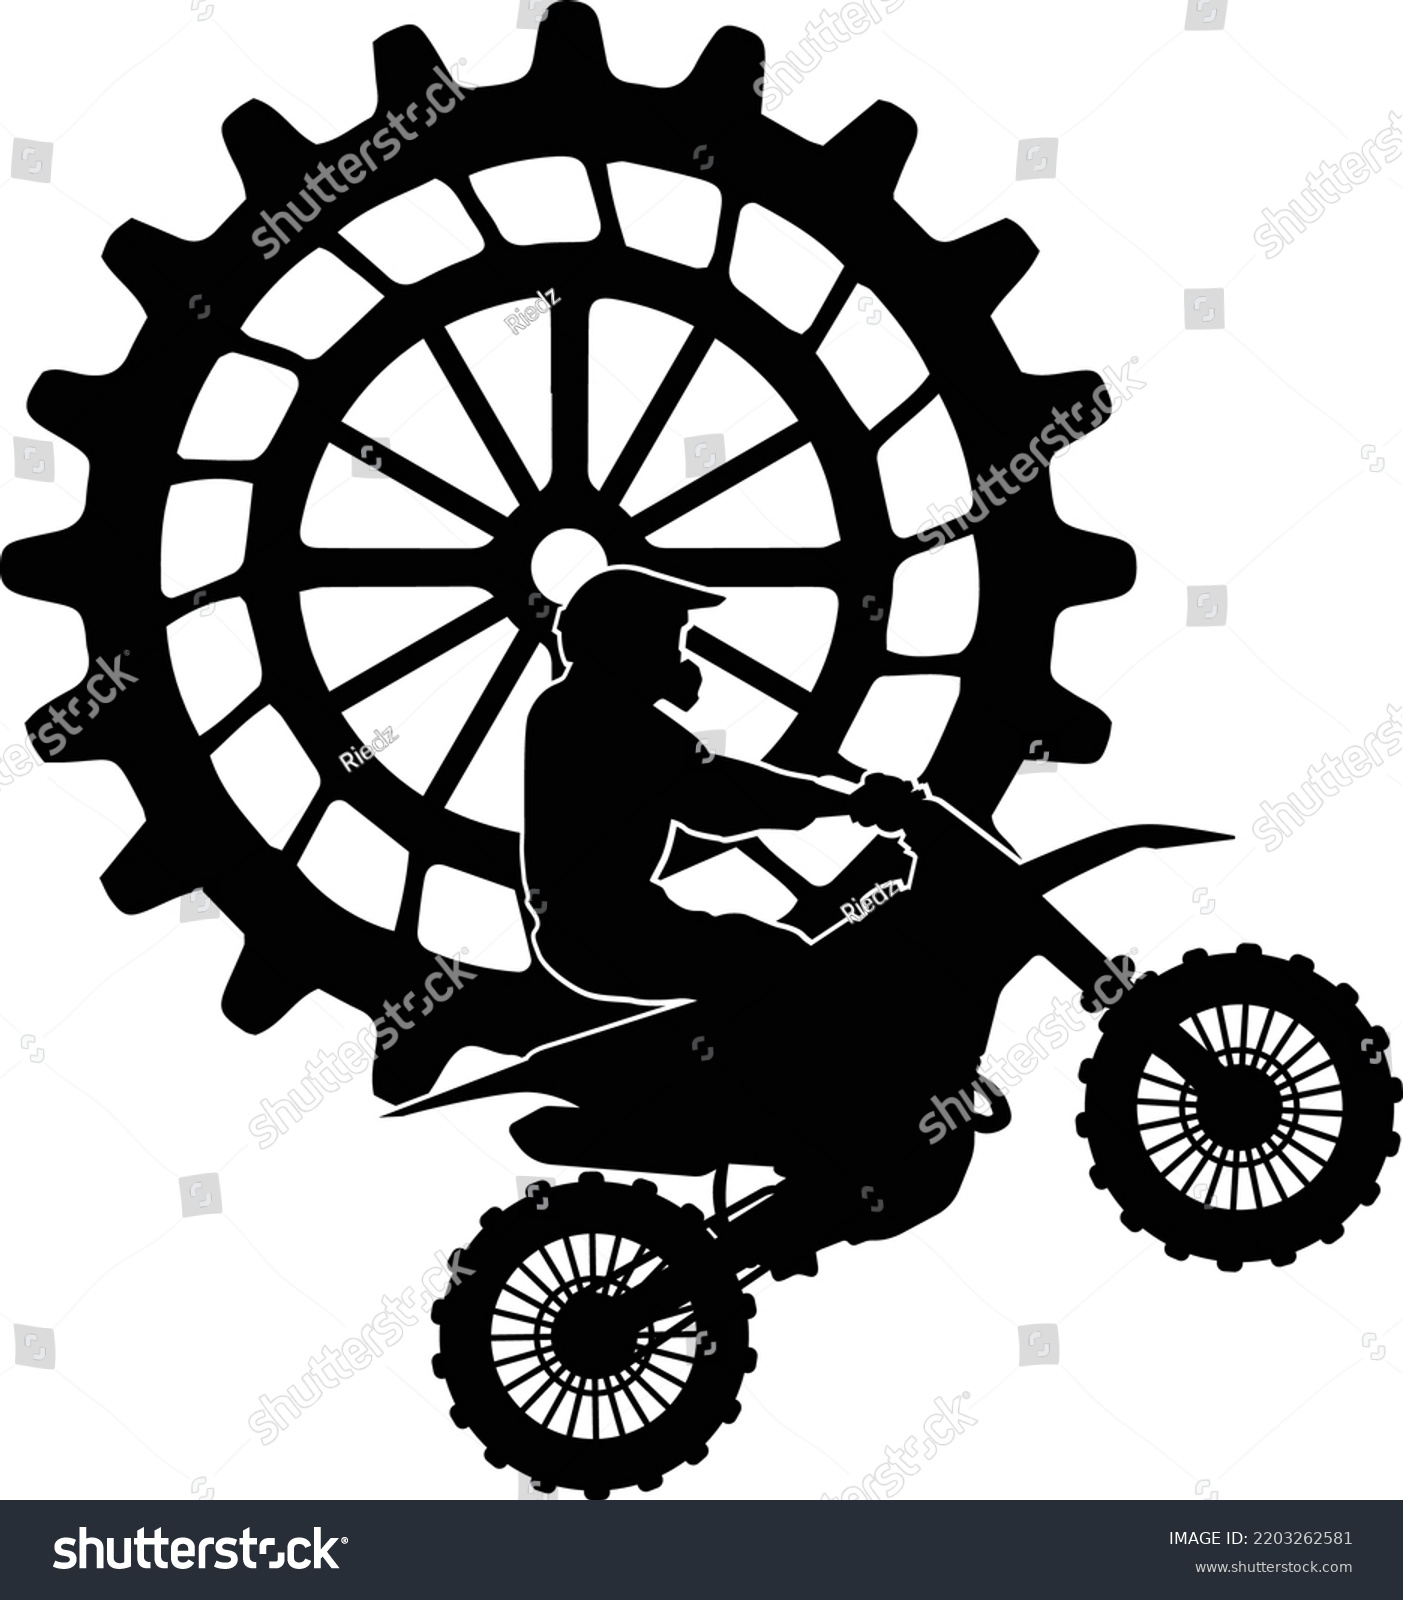 SVG of Motocross Silhouette, Motocross with Gear Background, American Flag Distressed svg